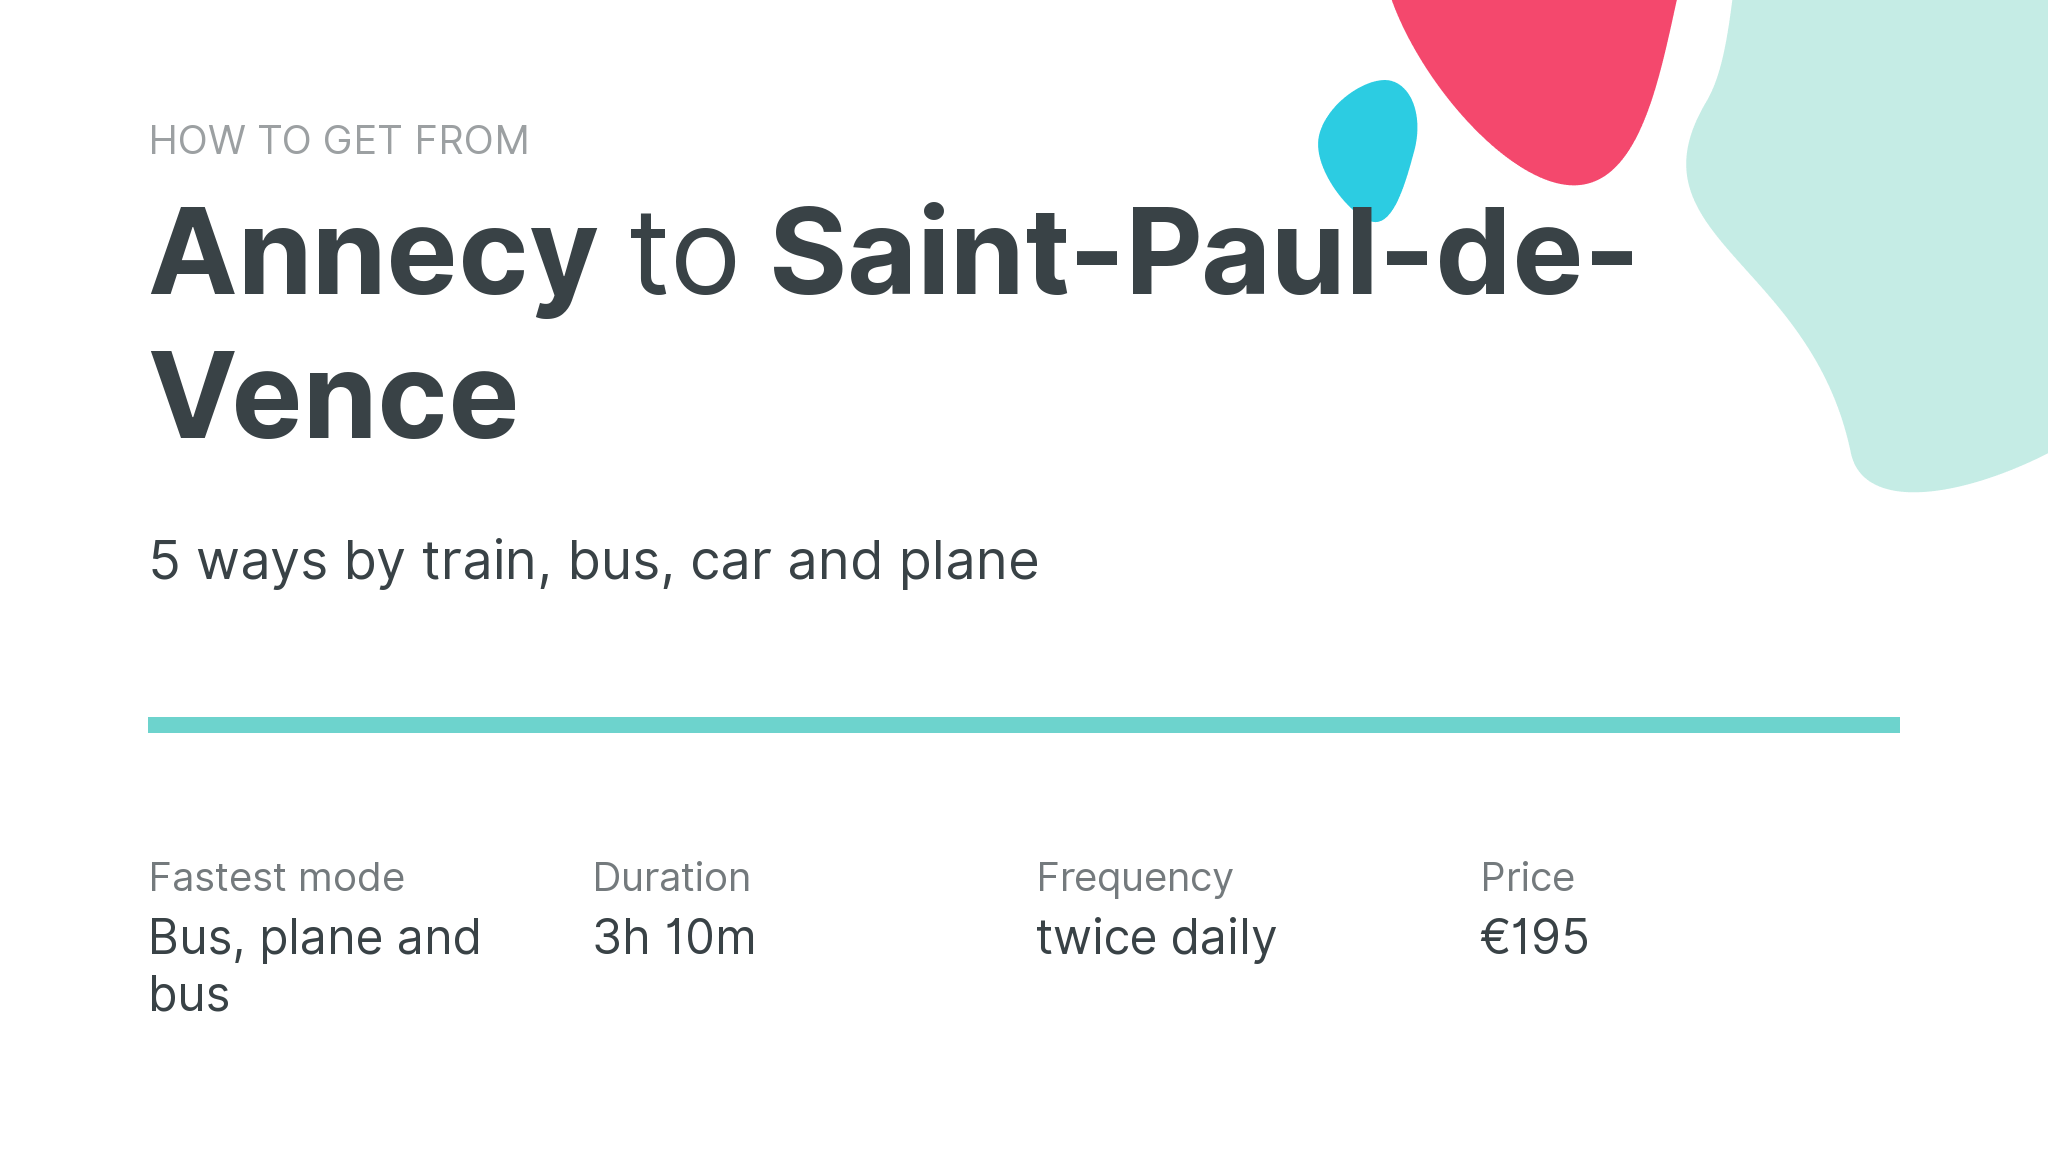 How do I get from Annecy to Saint-Paul-de-Vence